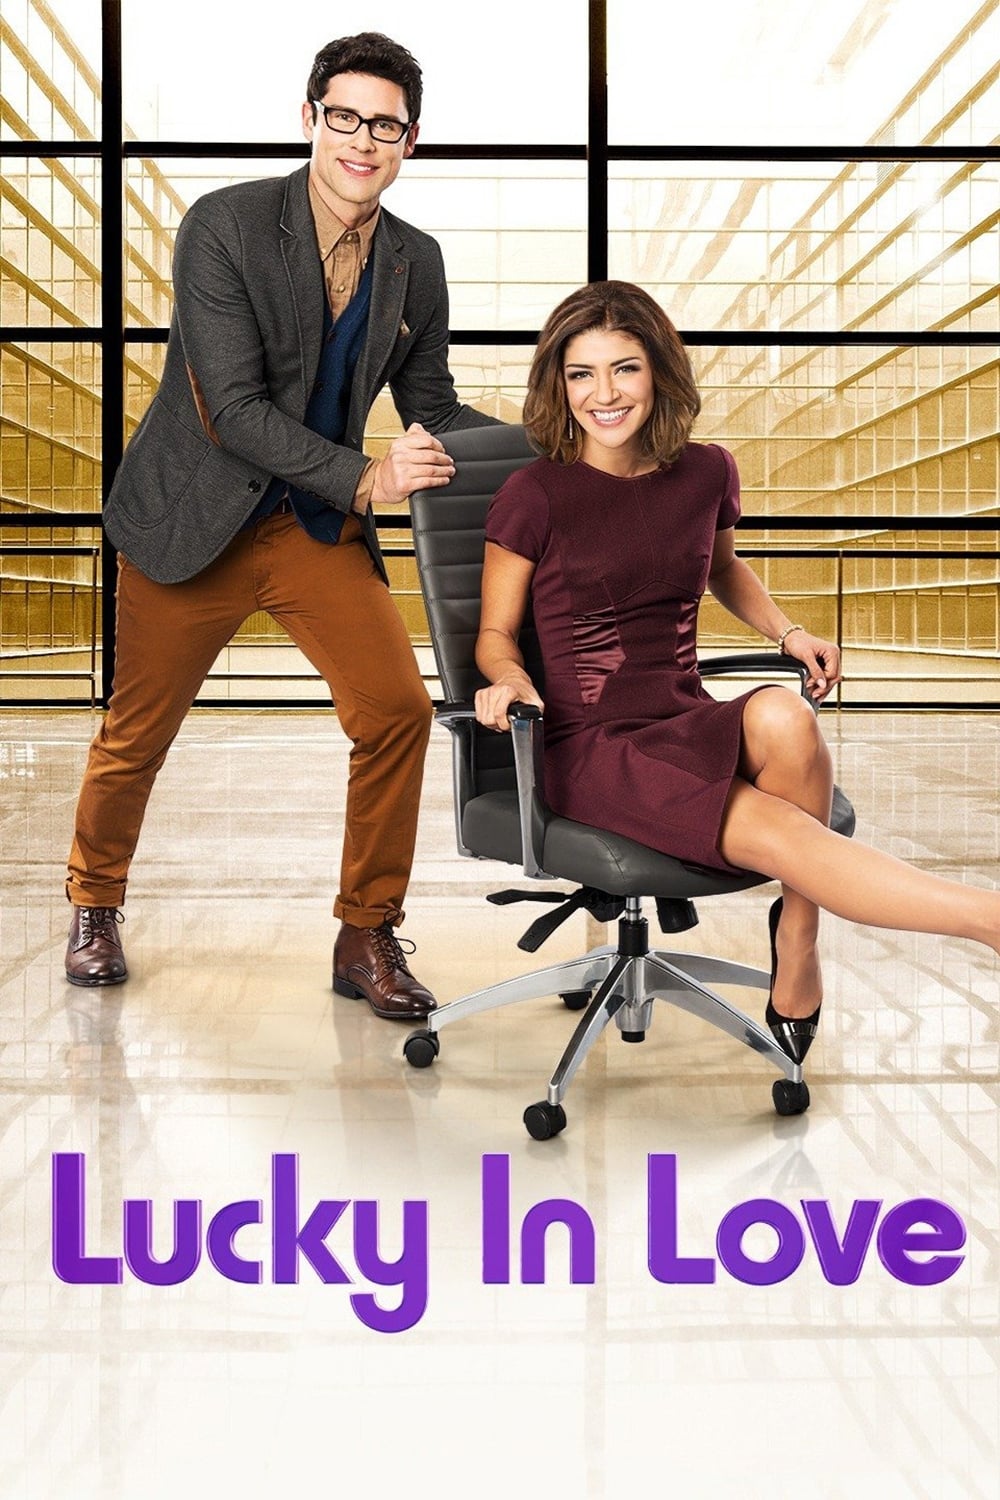 Lucky in Love (2014)